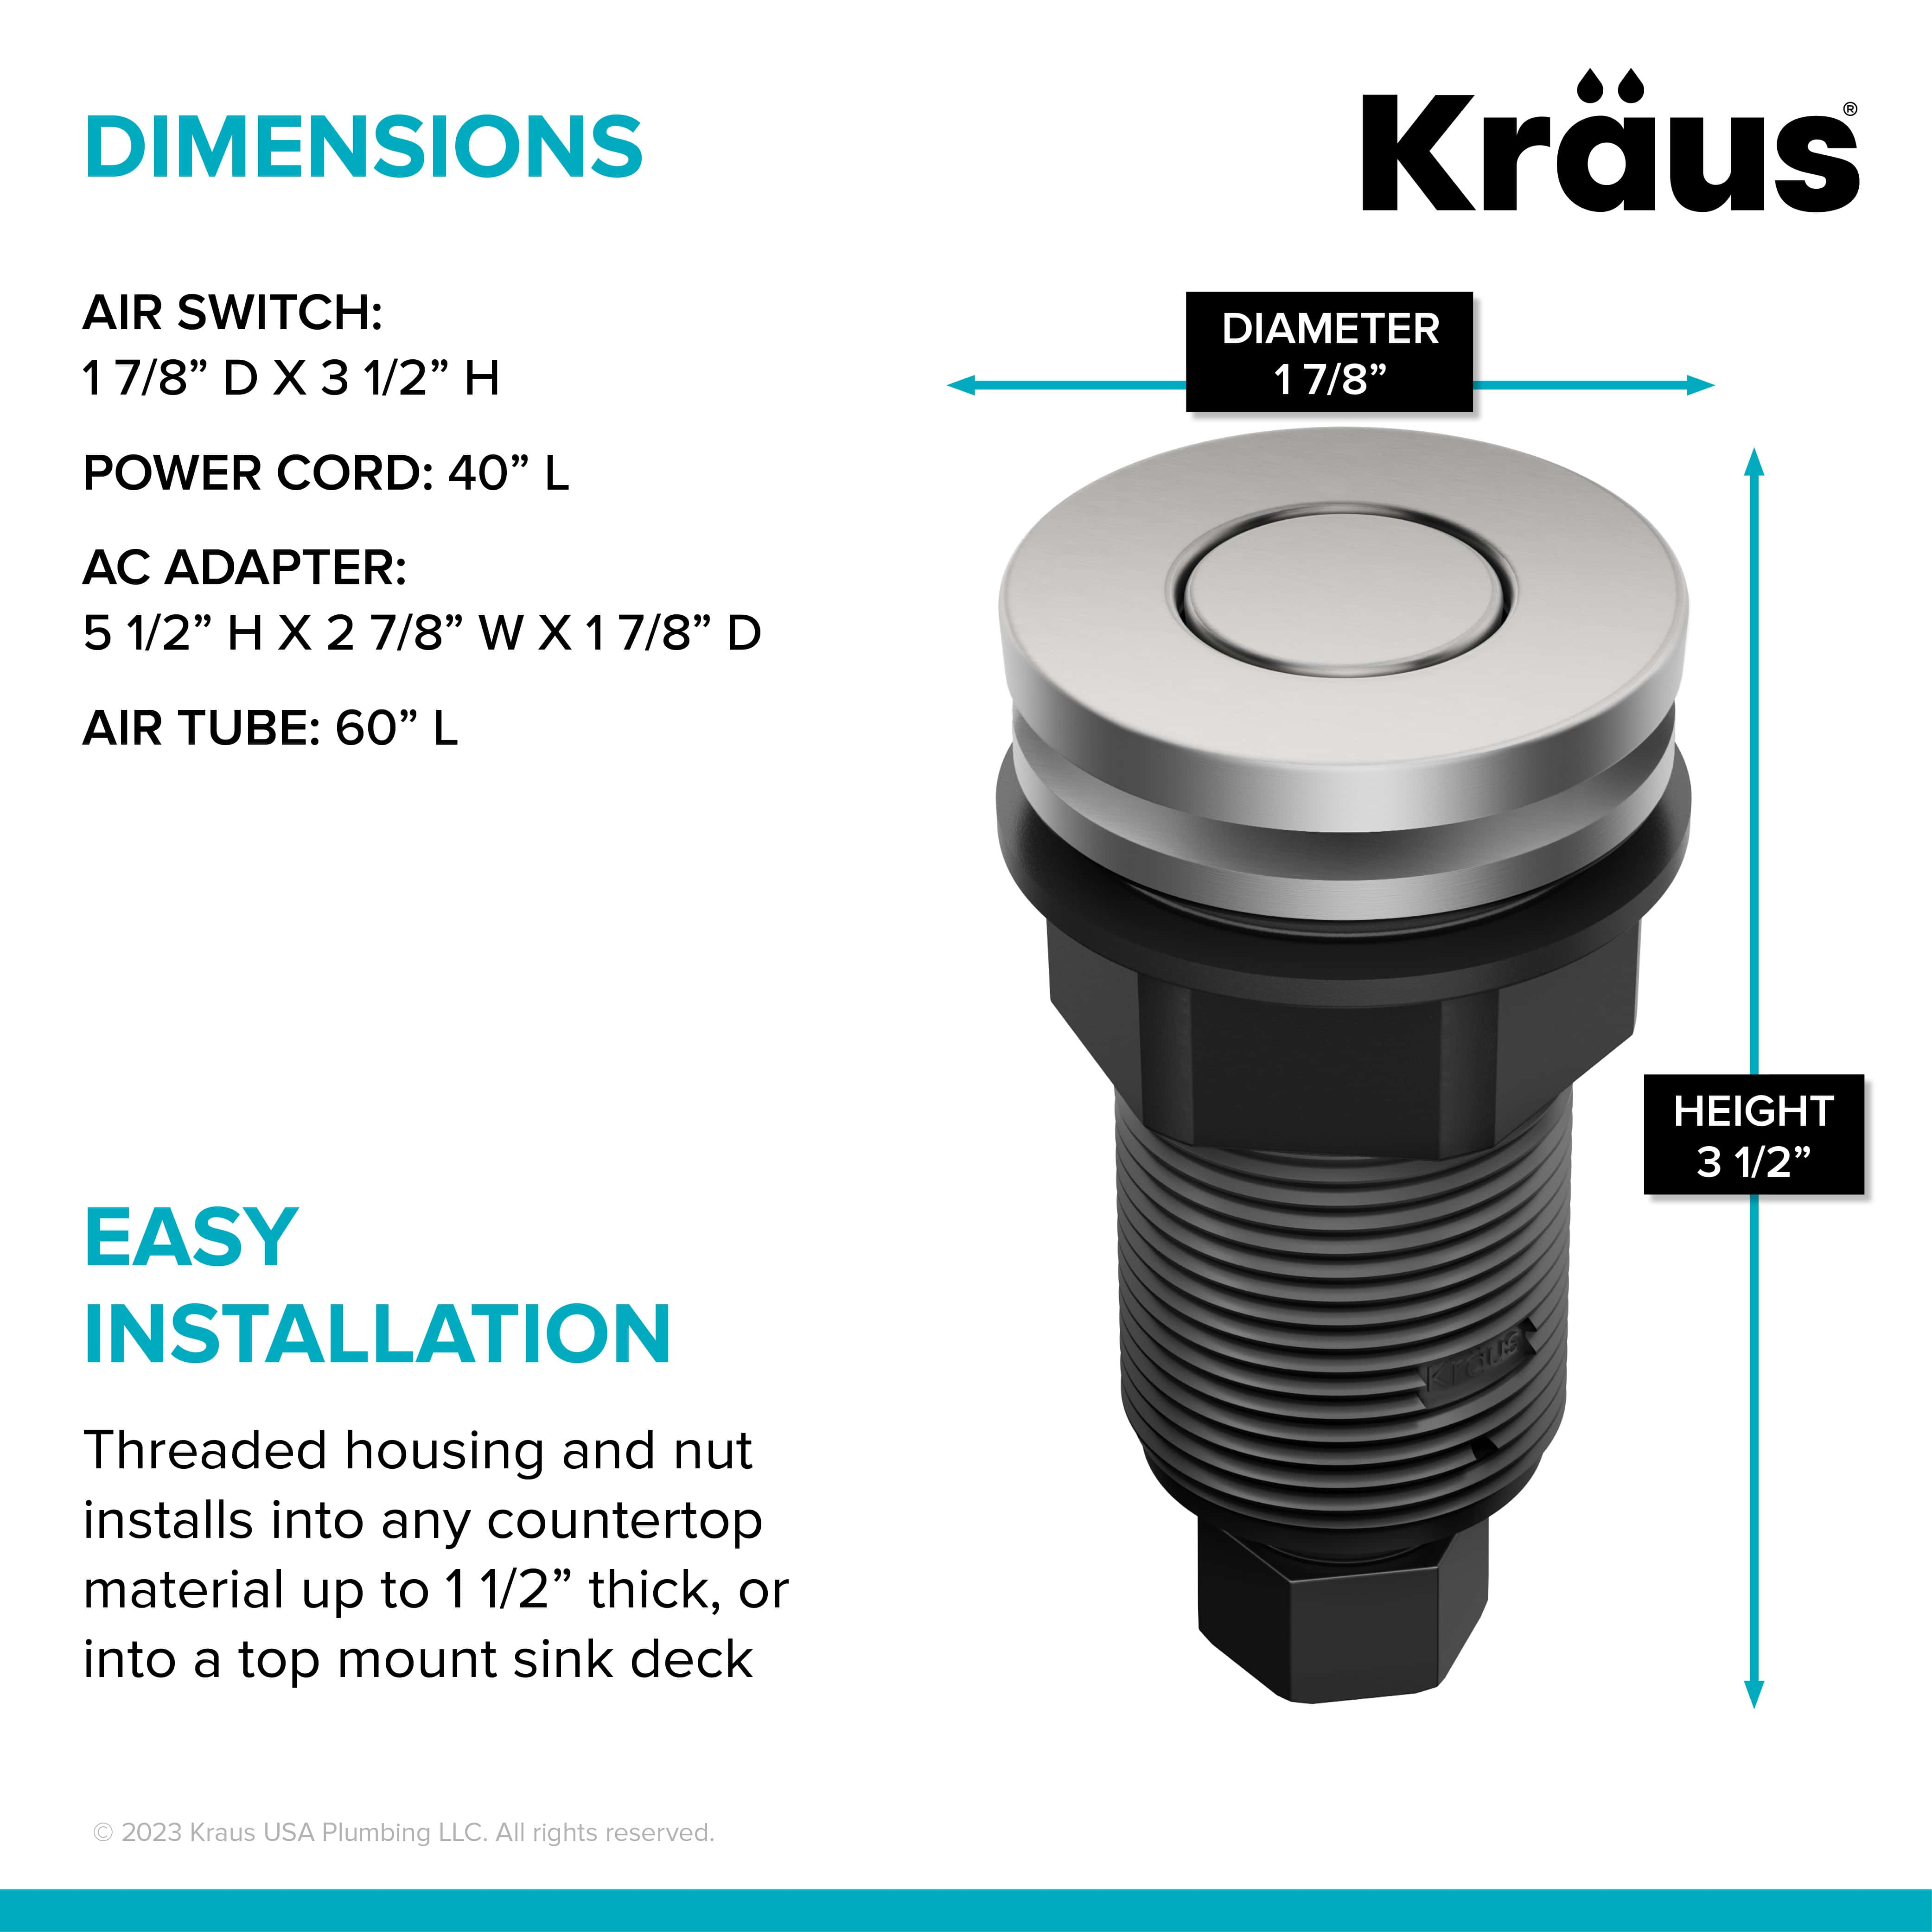 KRAUS Contemporary Flat Top Button Garbage Disposal Air Switch Kit in Spot-Free Stainless